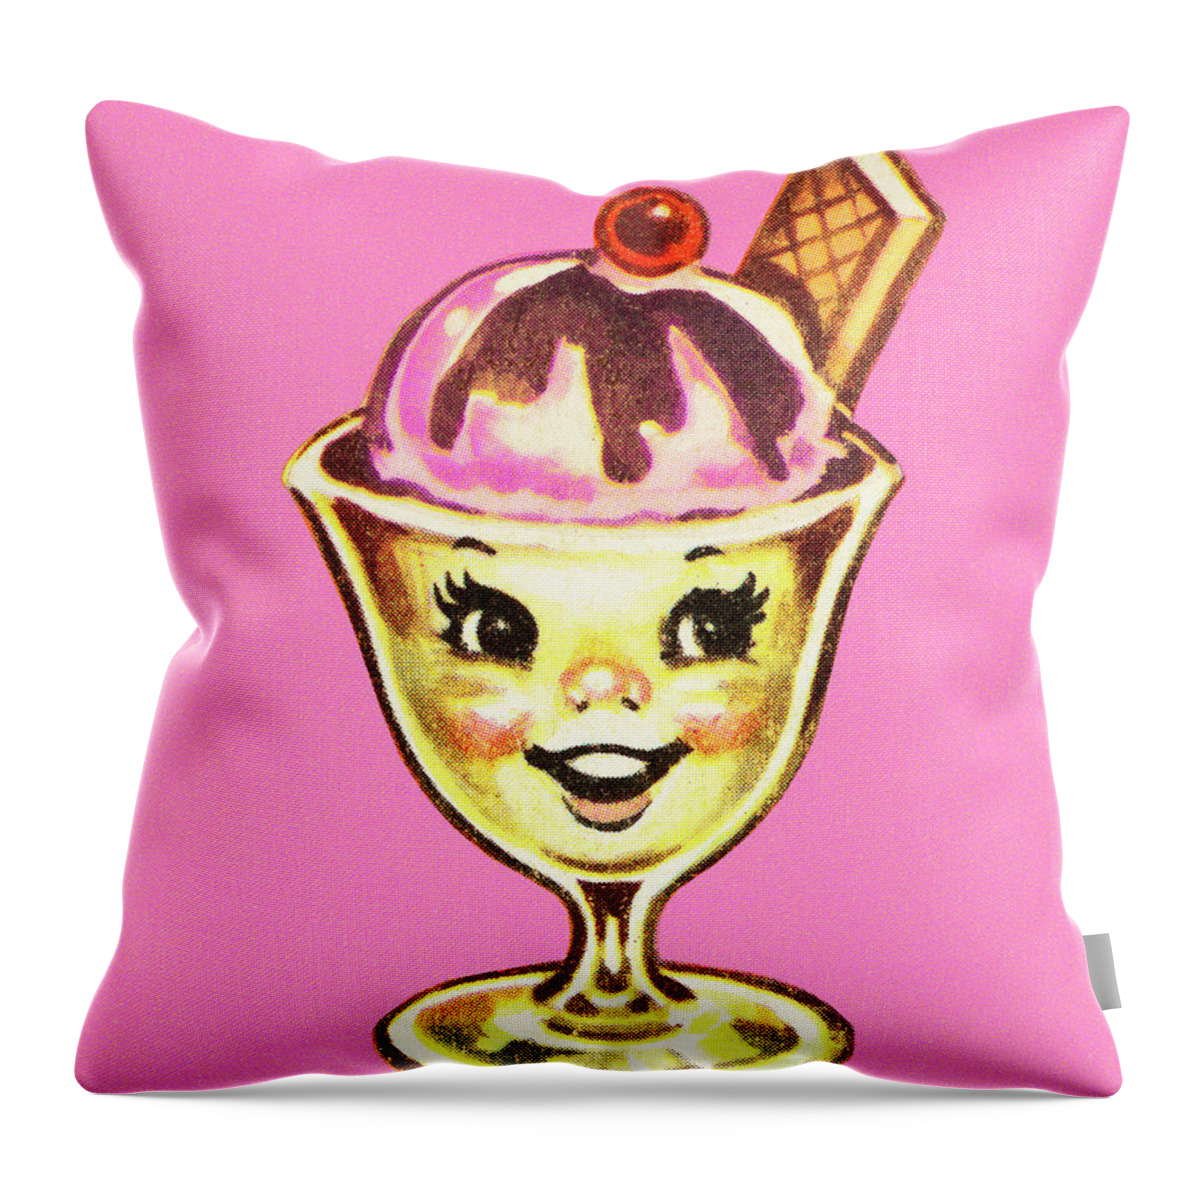 Bowl Throw Pillow featuring the drawing Ice Cream Sundae by CSA Images